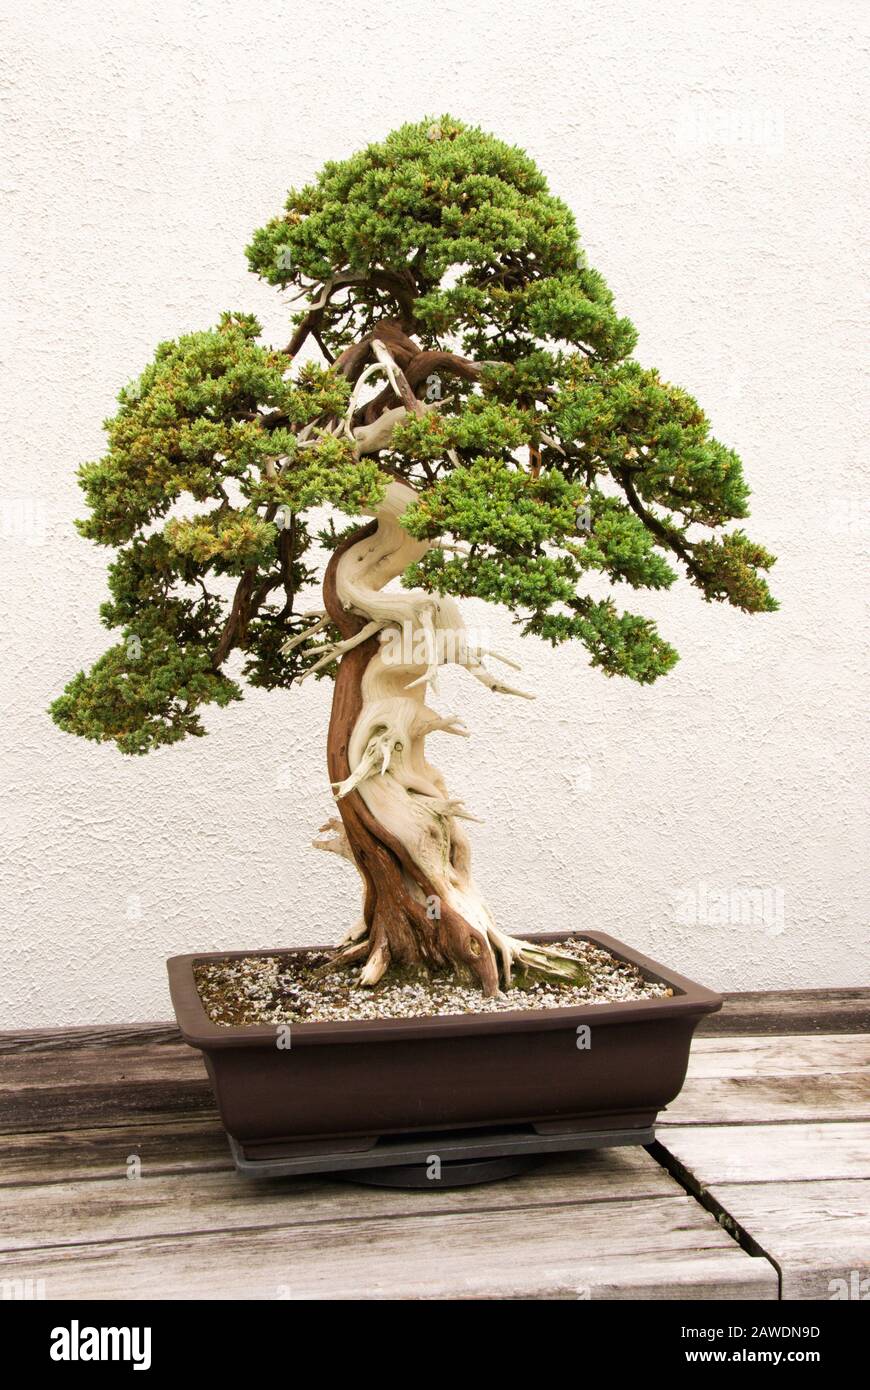 Small mature green colored bonsai tree growing in a potted container. This one has a beauty of a trunk. Stock Photo